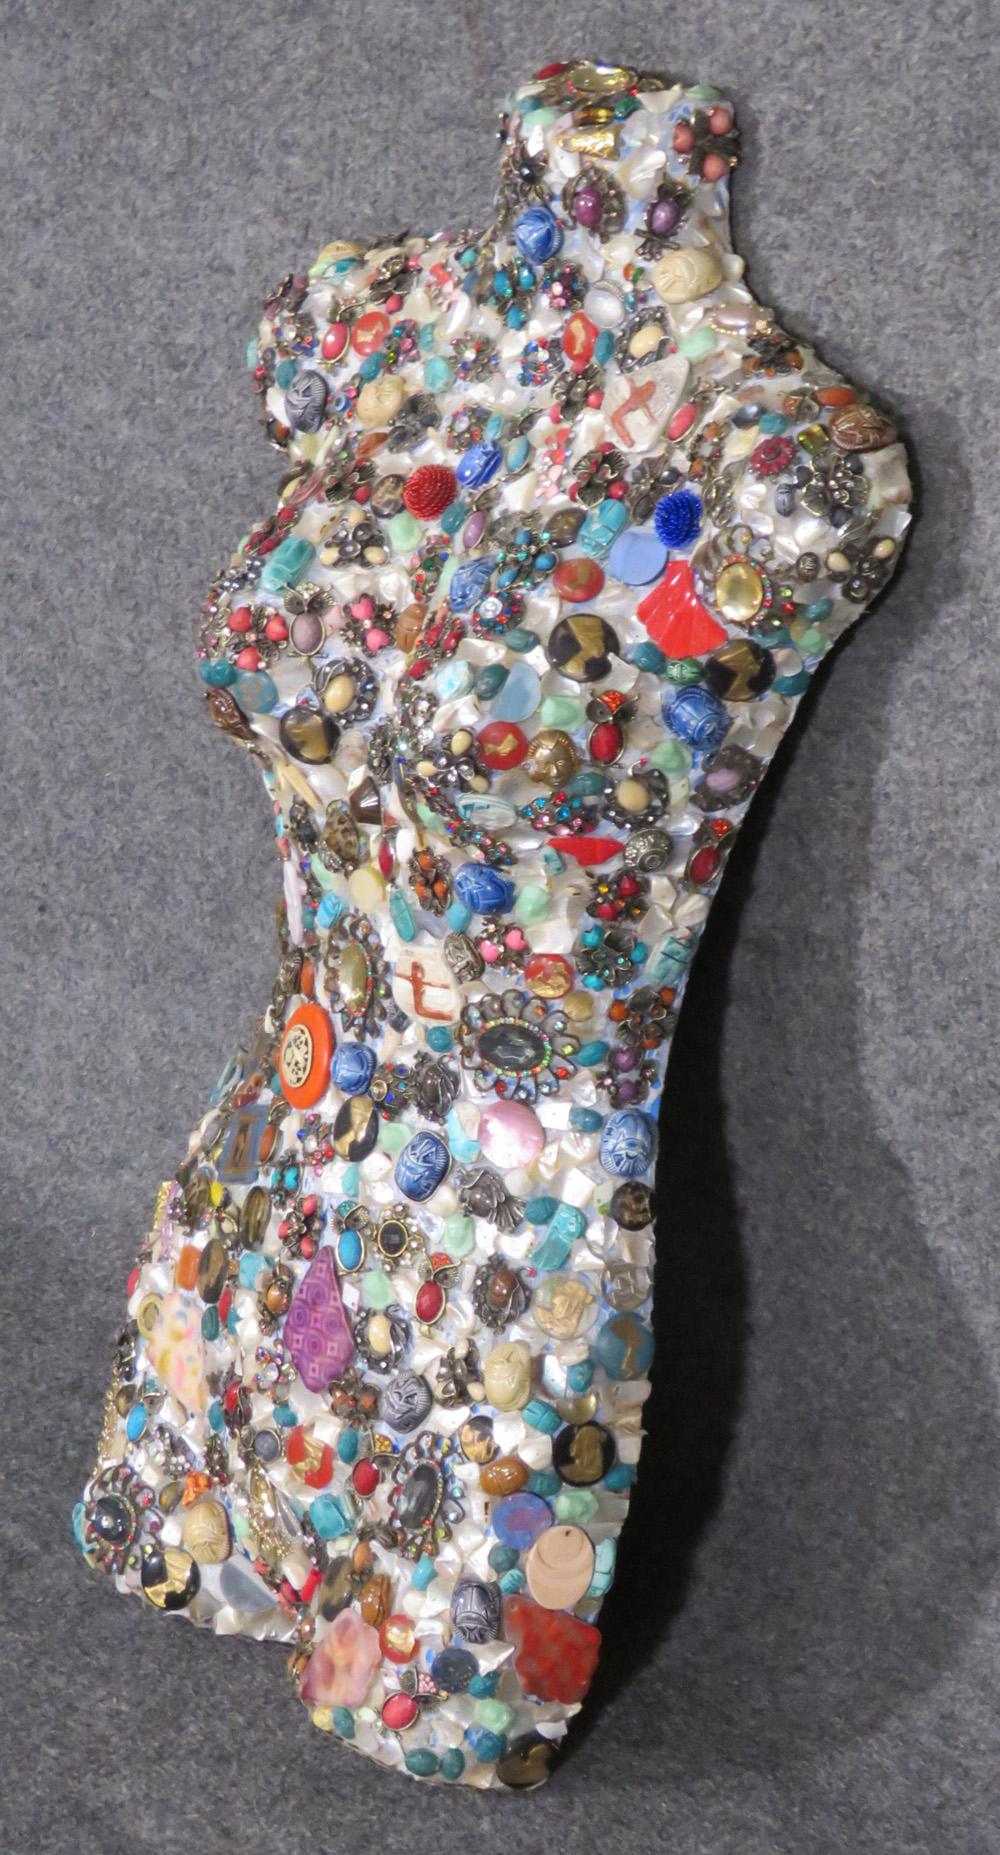 Measures: 29 tall x 16.5 wide x 5.5 deep

This is a gorgeous jeweled torso or mannequin. The body is studded with jewels, scarab beetles and various other beautiful objects. This is an artist's piece. Dates to the 1960s and is an interesting item